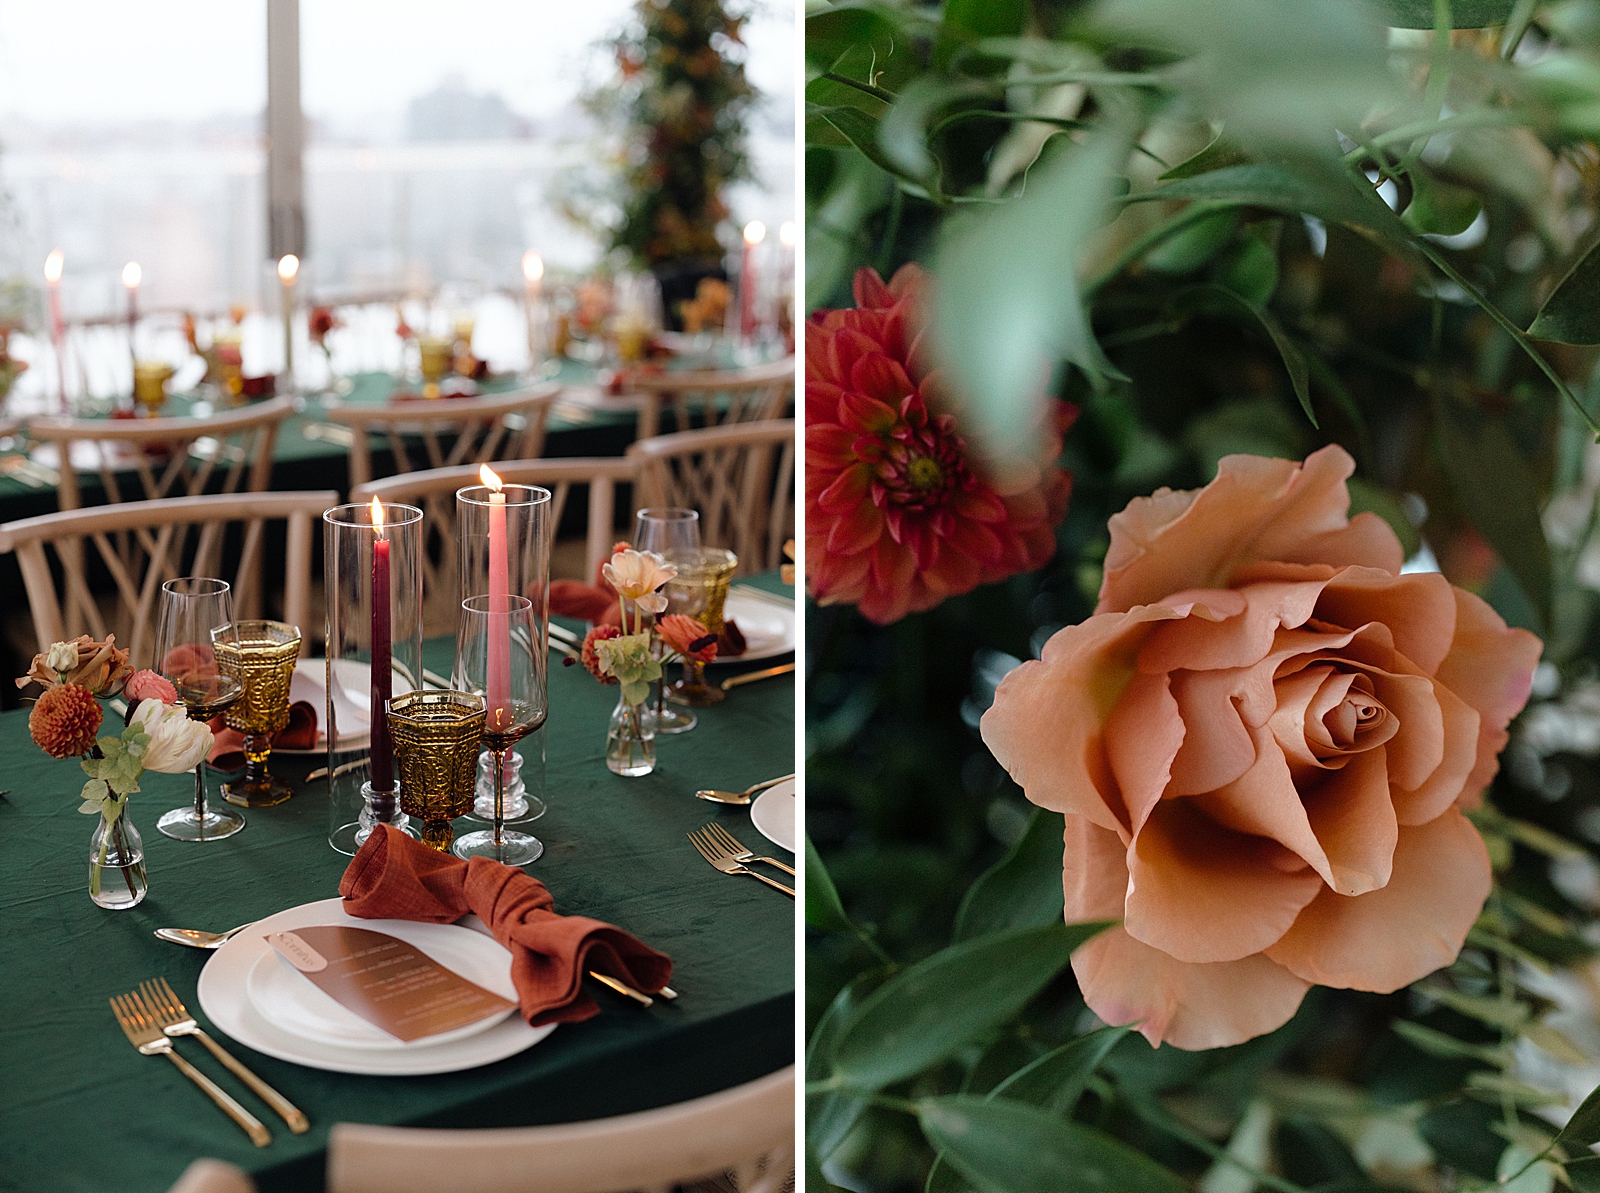 Left photo: Close up shot of a place setting on a reception table. 
Right photo: Close up shot of a pink flower. 